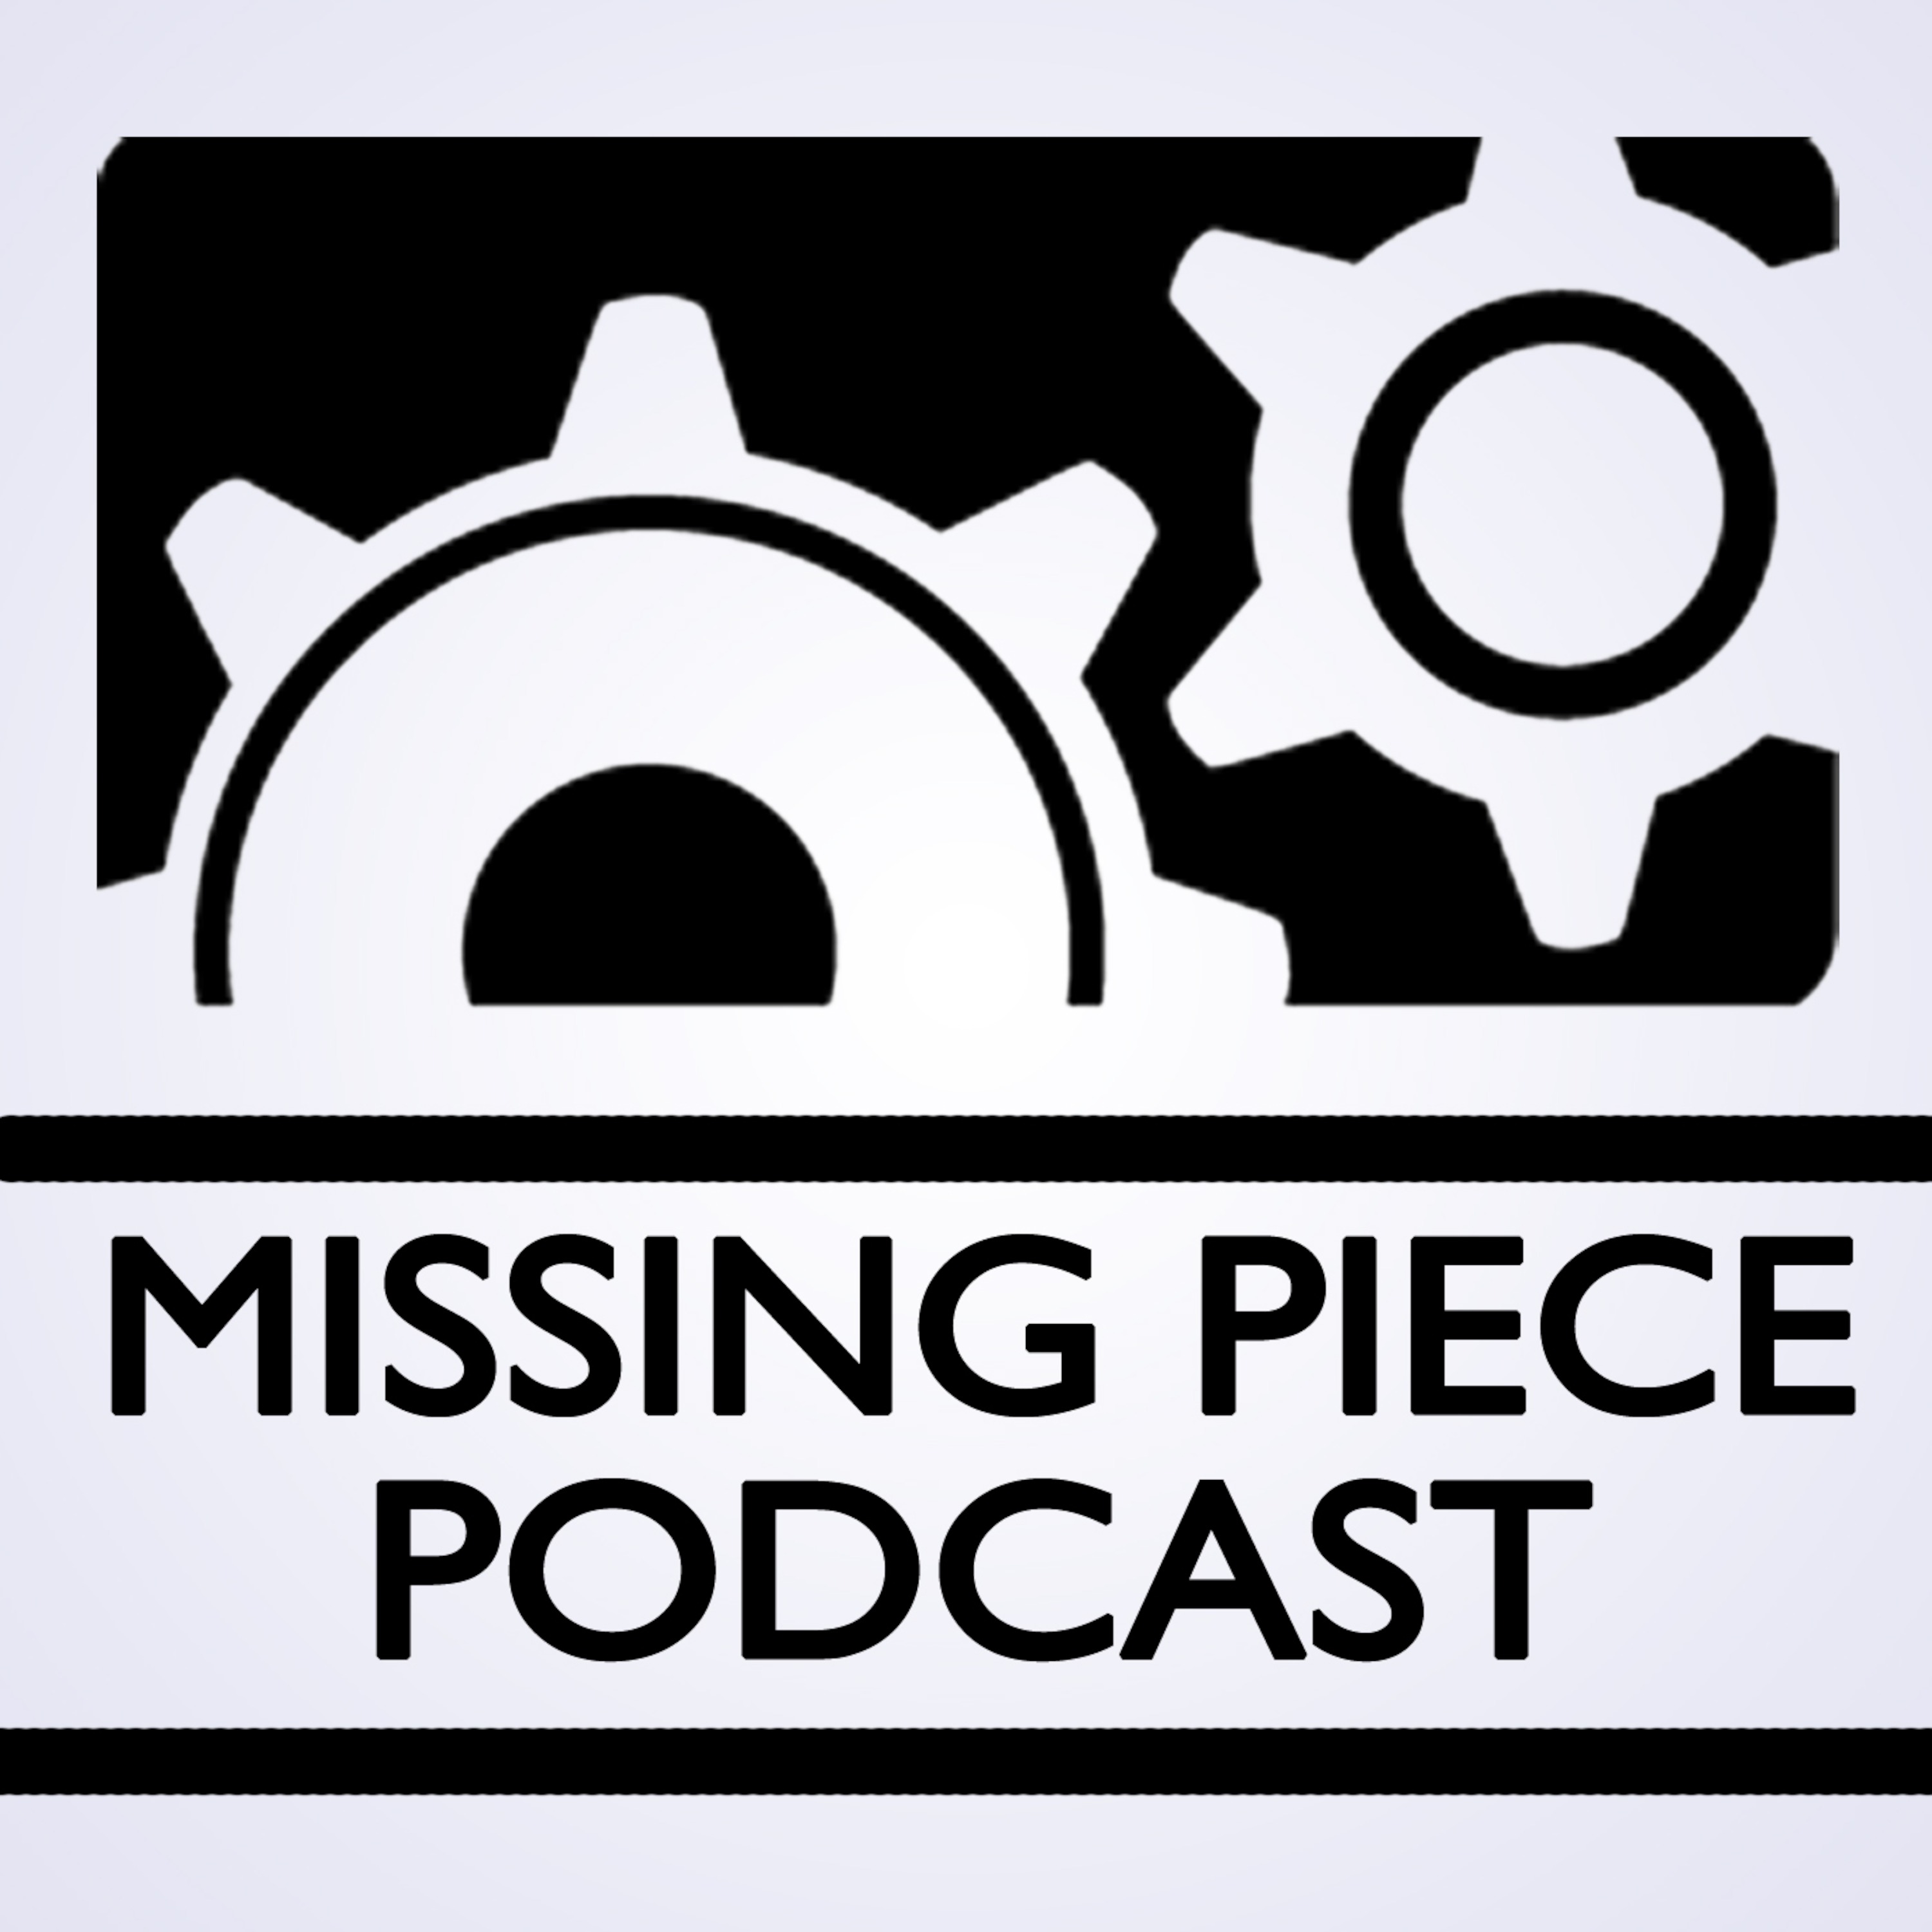 Missing Piece Podcast